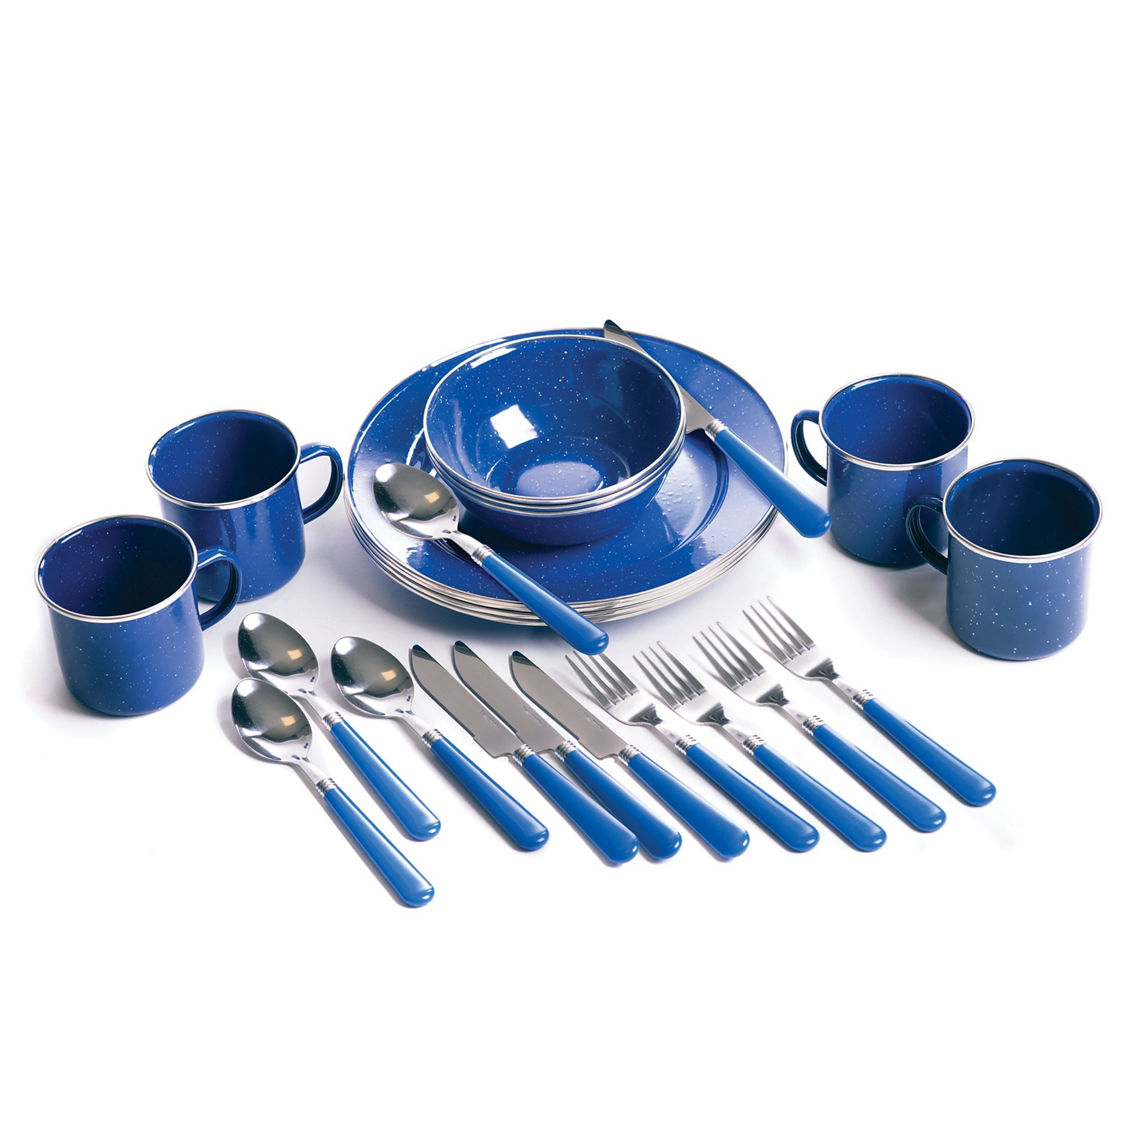 Stansport 24 pc Deluxe Enamelware Set - Image 2 of 5